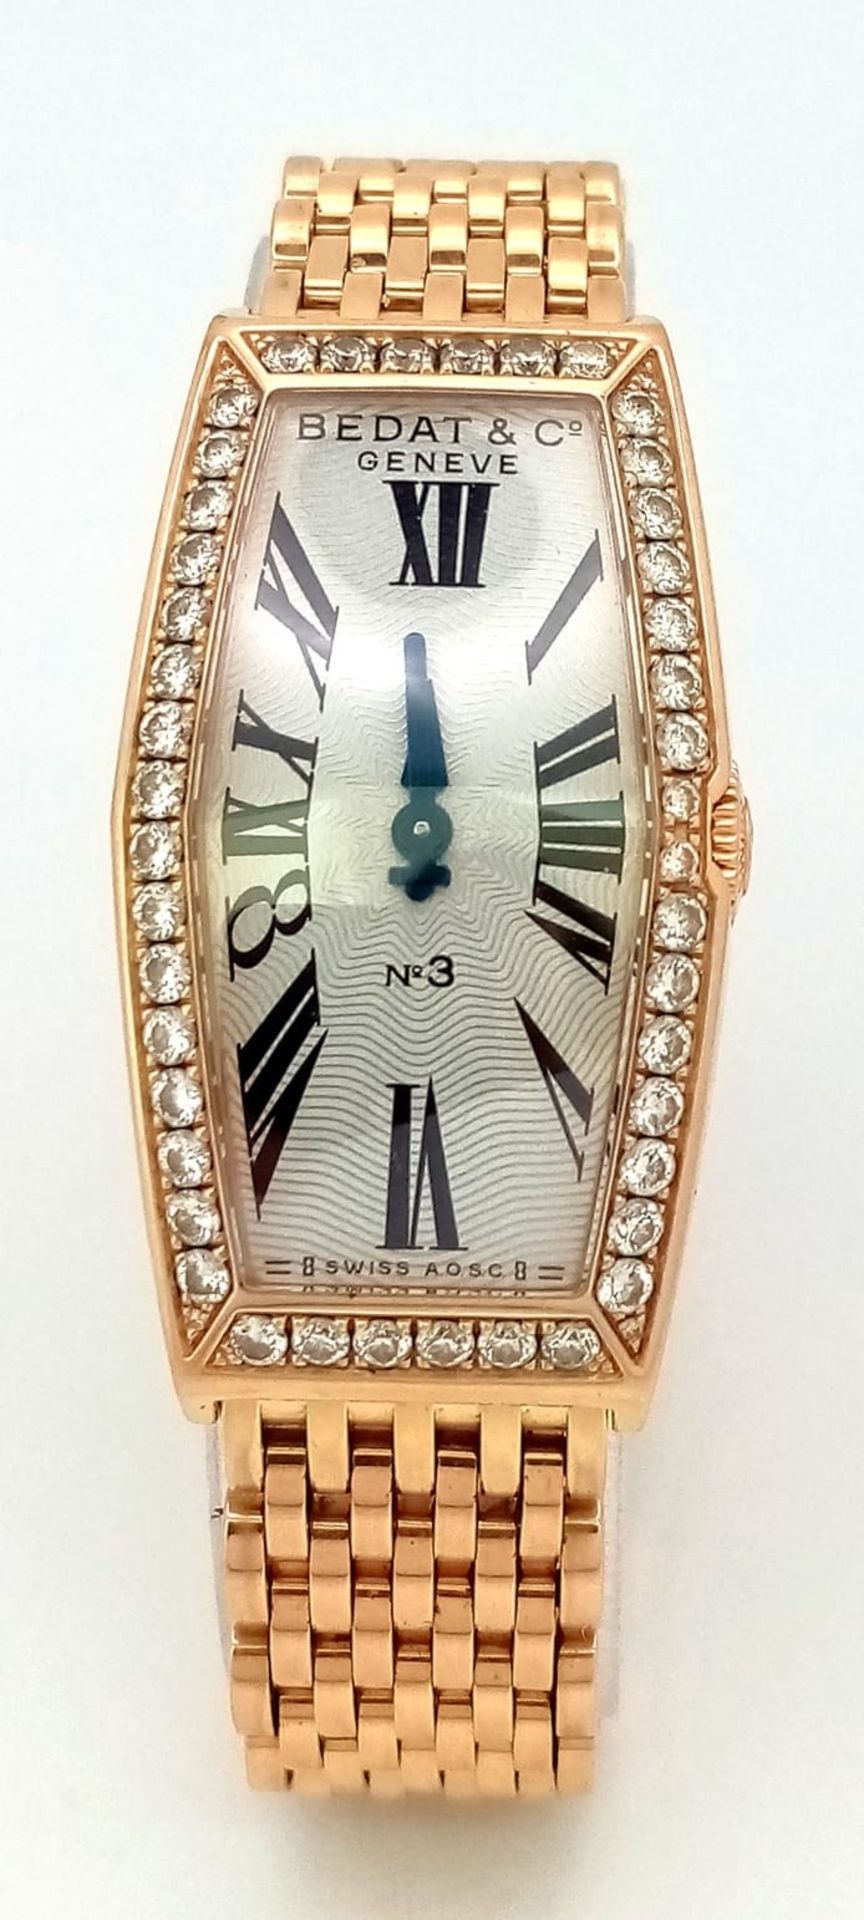 A BEDAT AND CO 18K GOLD LADIES WRIST WATCH WITH DIAMOND BEZEL AND SOLID 18K GOLD STRAP, UNIQUE